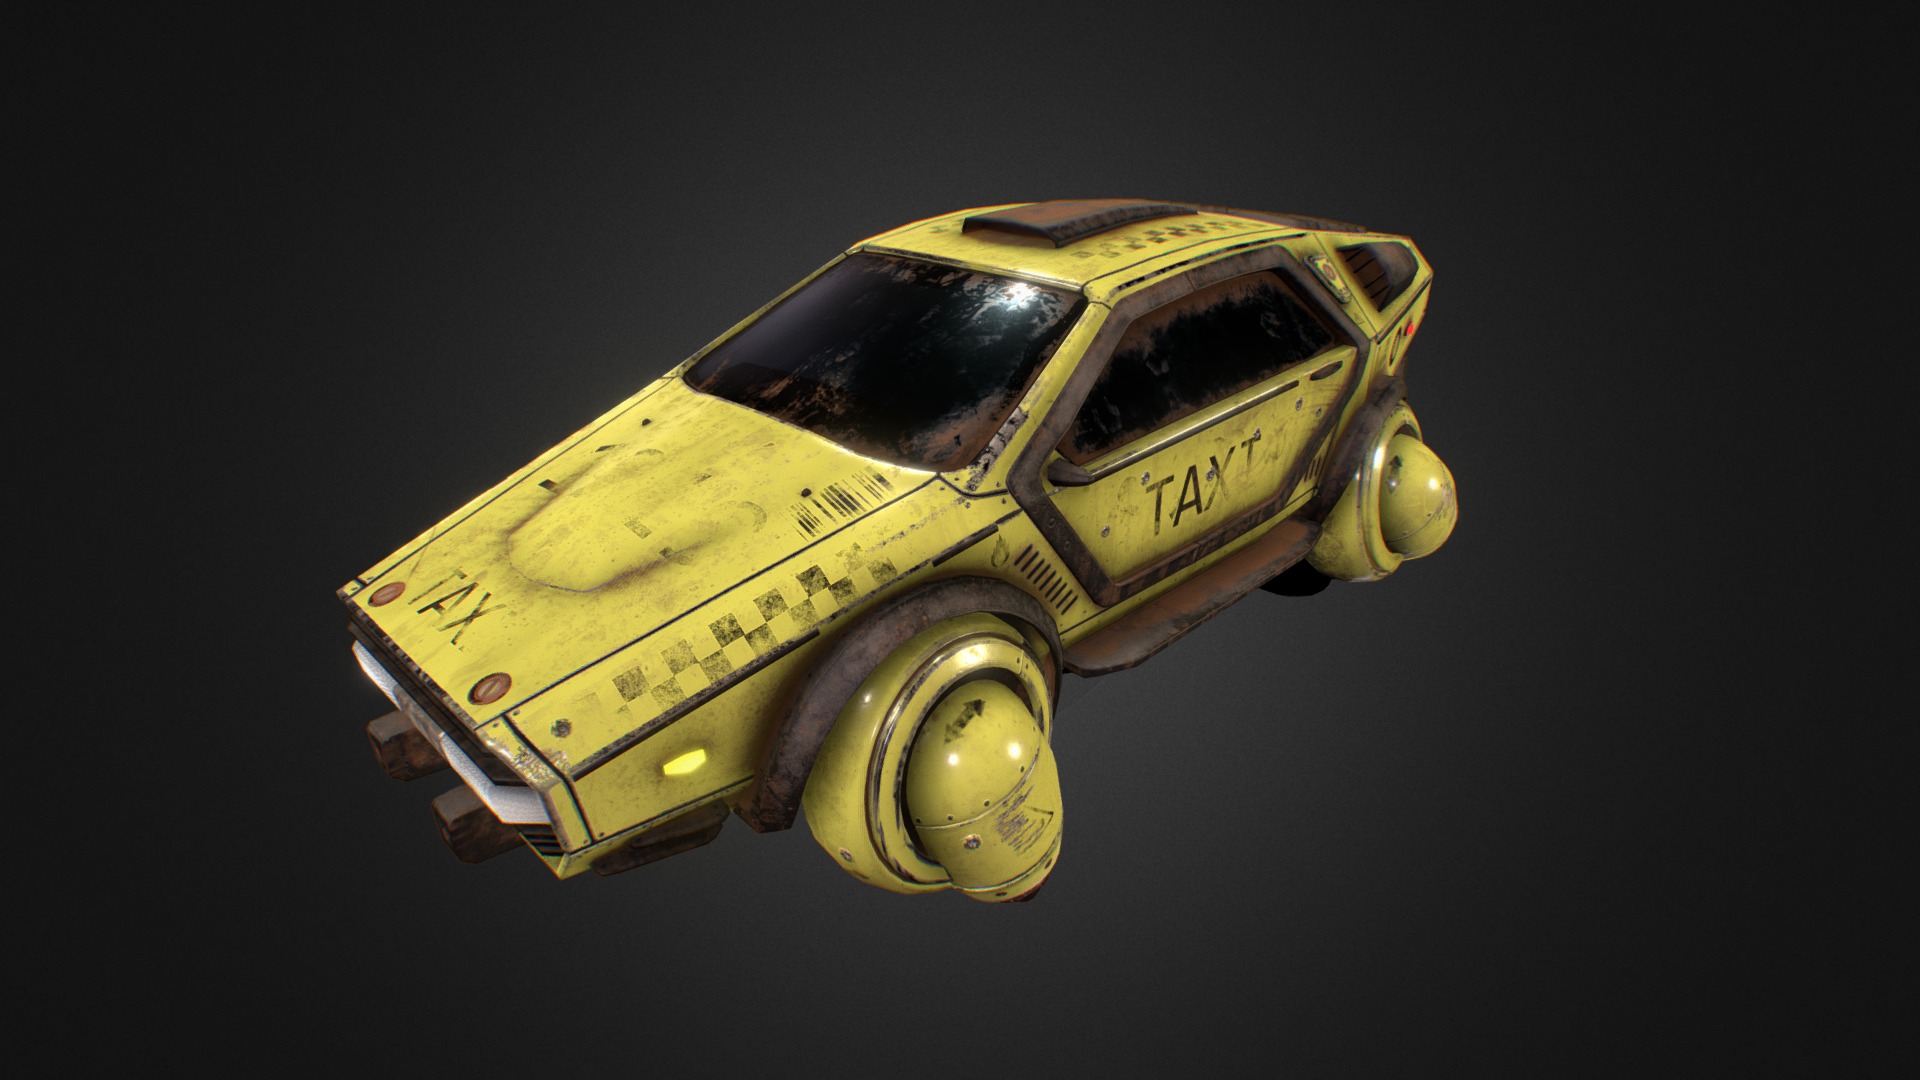 3D model Cyberpunk hovercar taxi - This is a 3D model of the Cyberpunk hovercar taxi. The 3D model is about a yellow toy car.